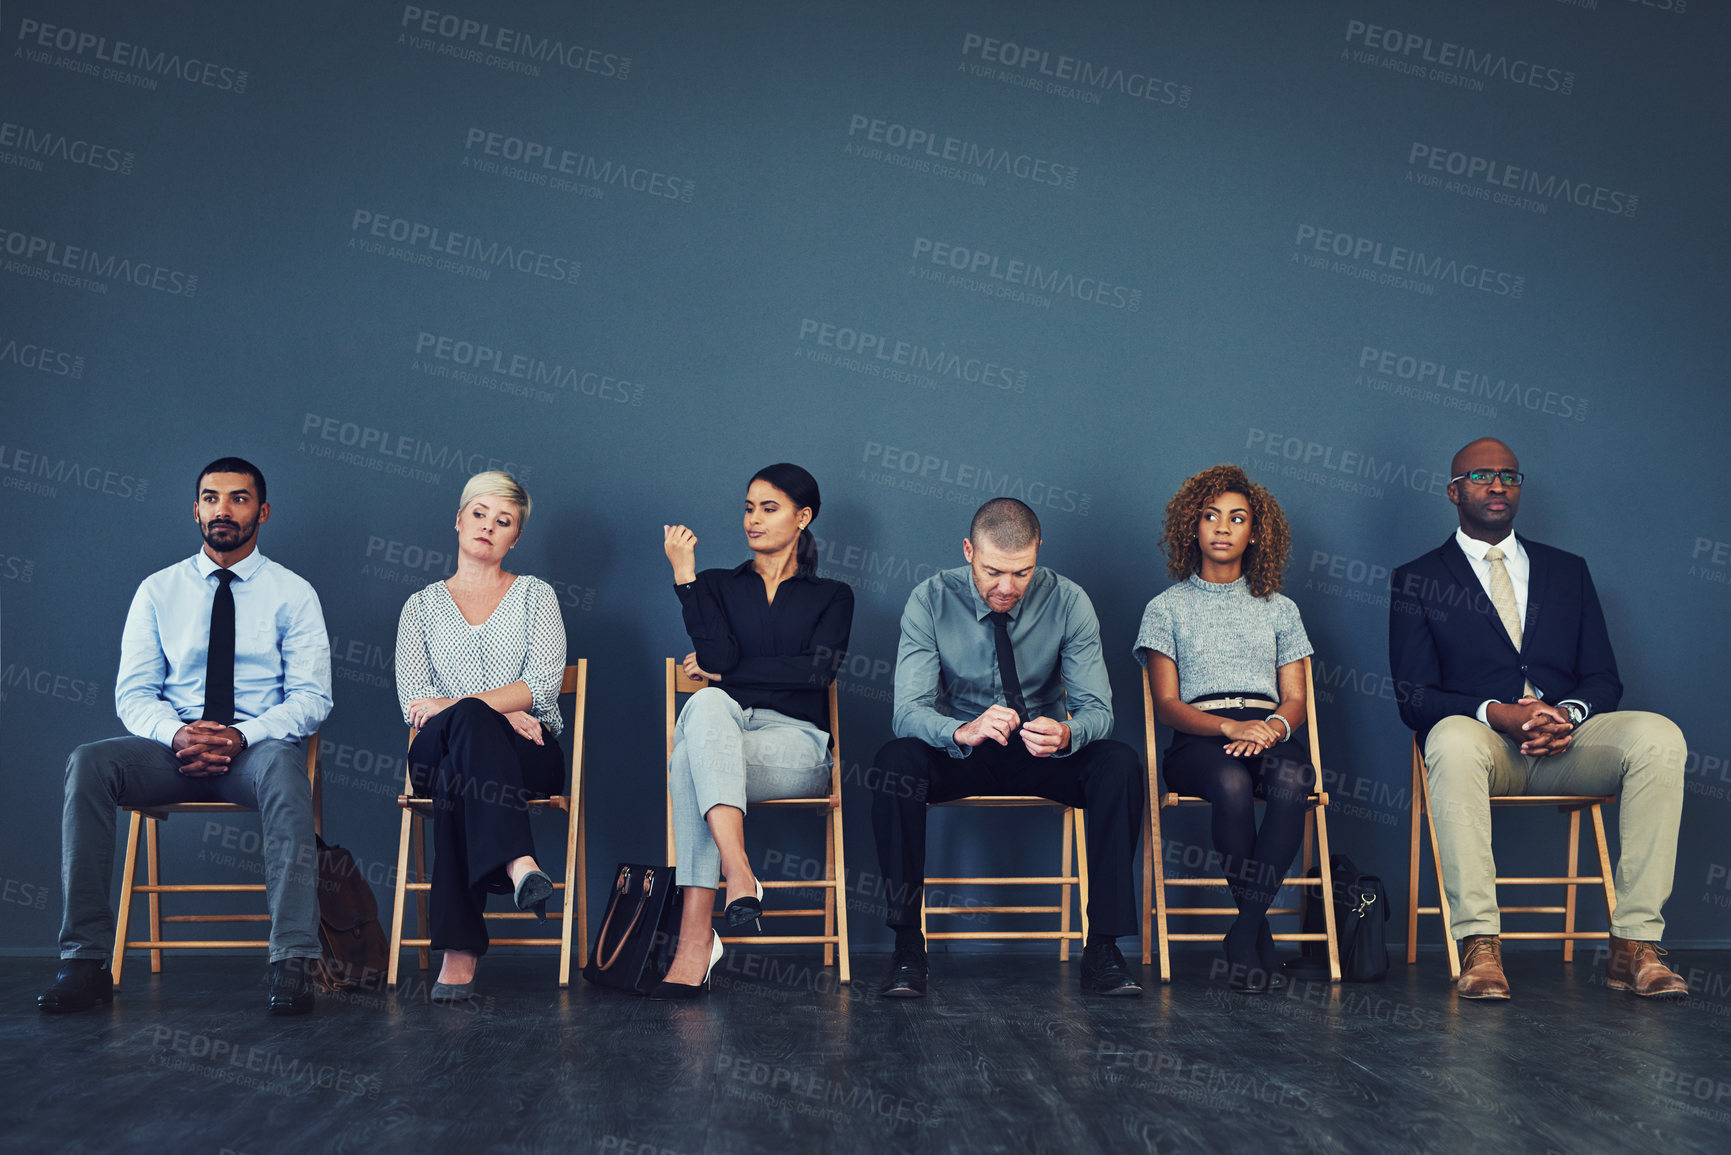 Buy stock photo Shot of a group of well dressed businesspeople seated in line while waiting to be interview